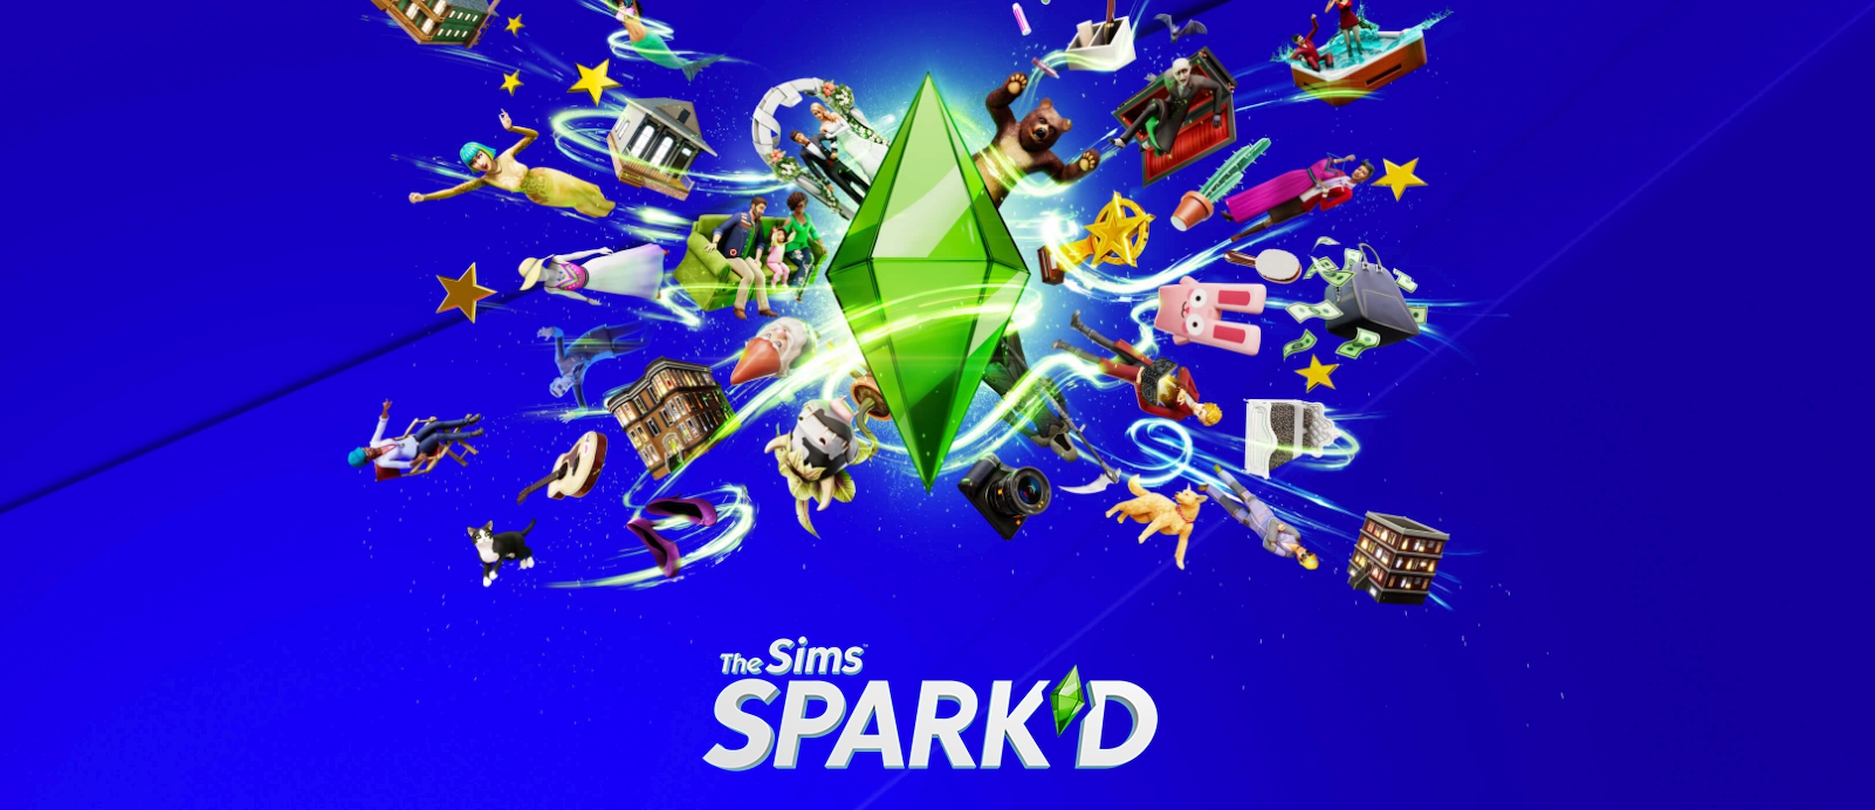 The Sims Spark’d Reality TV Show Competition Featuring Real-Life YouTubers And Streamers Debuts